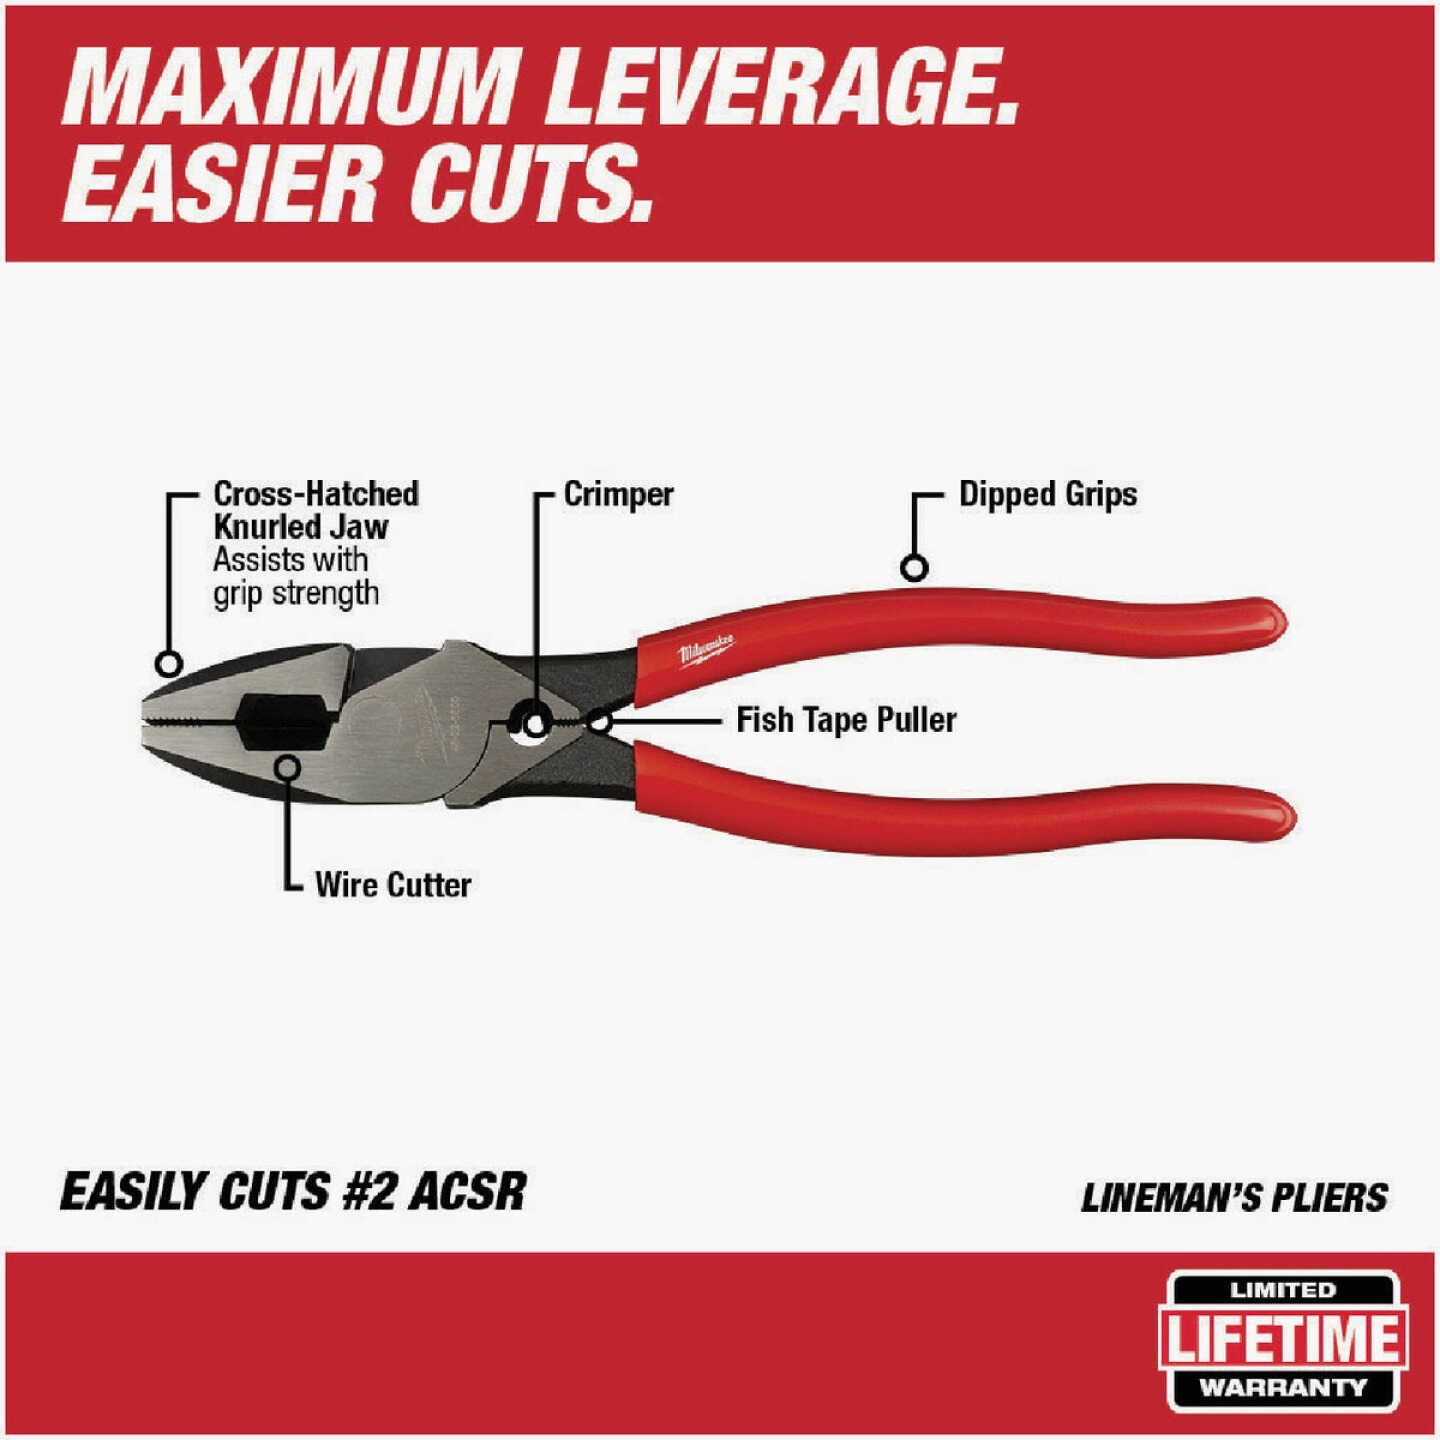 Milwaukee 8 In. Comfort Grip Long Nose Pliers (USA) - McCabe Do it Center